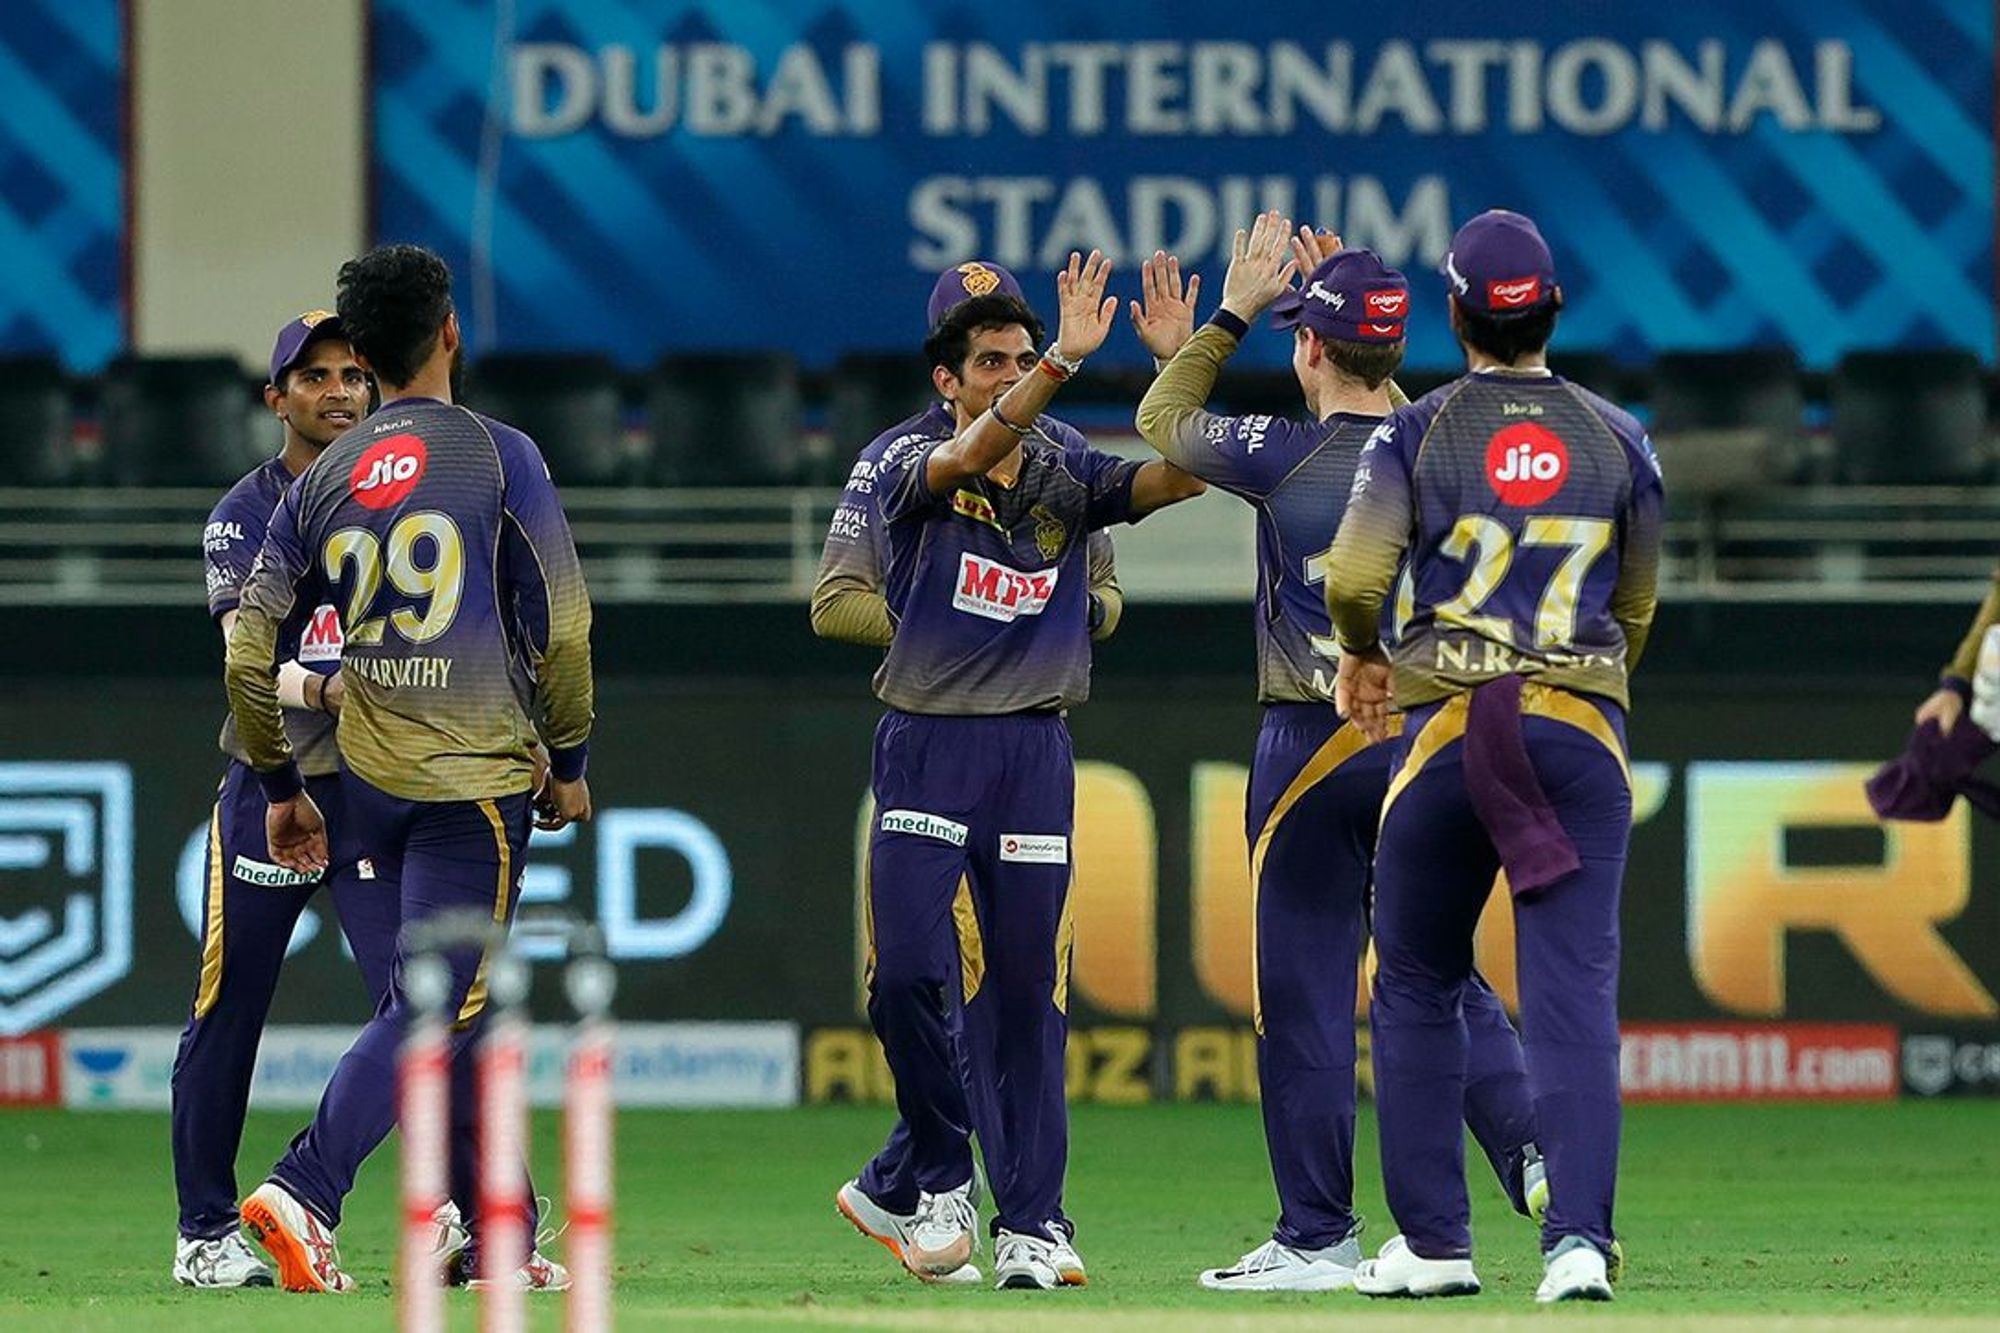 IPL 2020 | KKR cannot have two inexperienced India pacers in their lineup, opines Joy Bhattacharjya